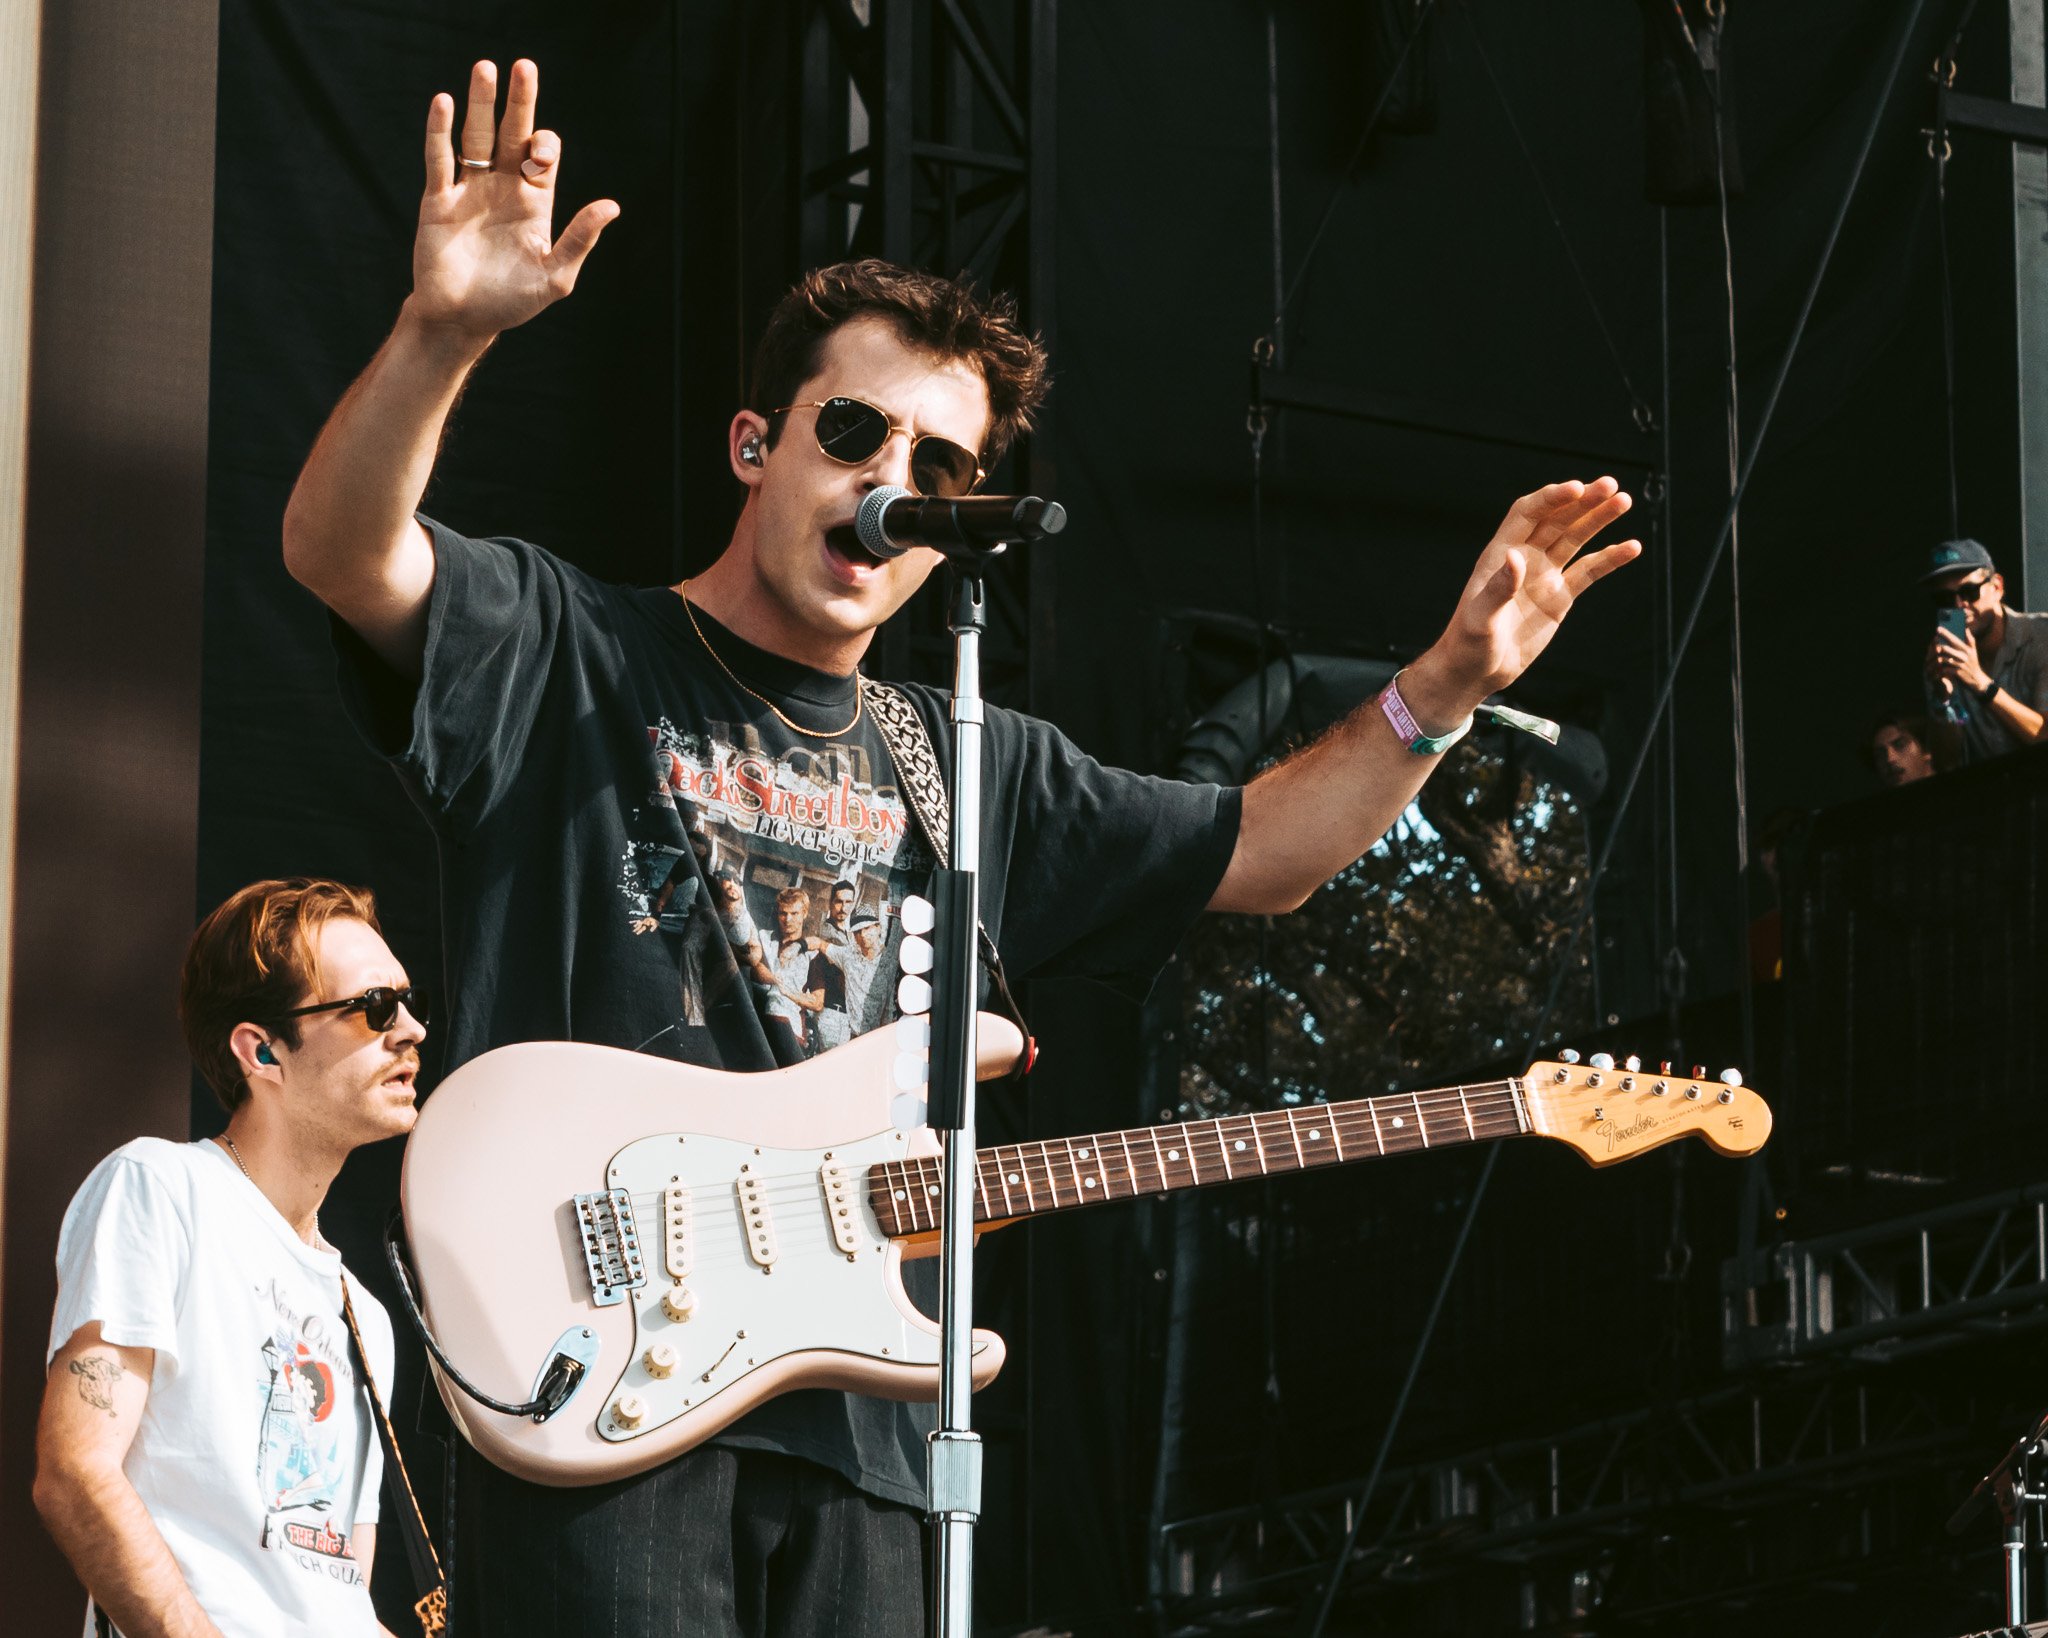  Indie-rock band Wallows opens their set with “Scrawny”   and “I’m Full.” 